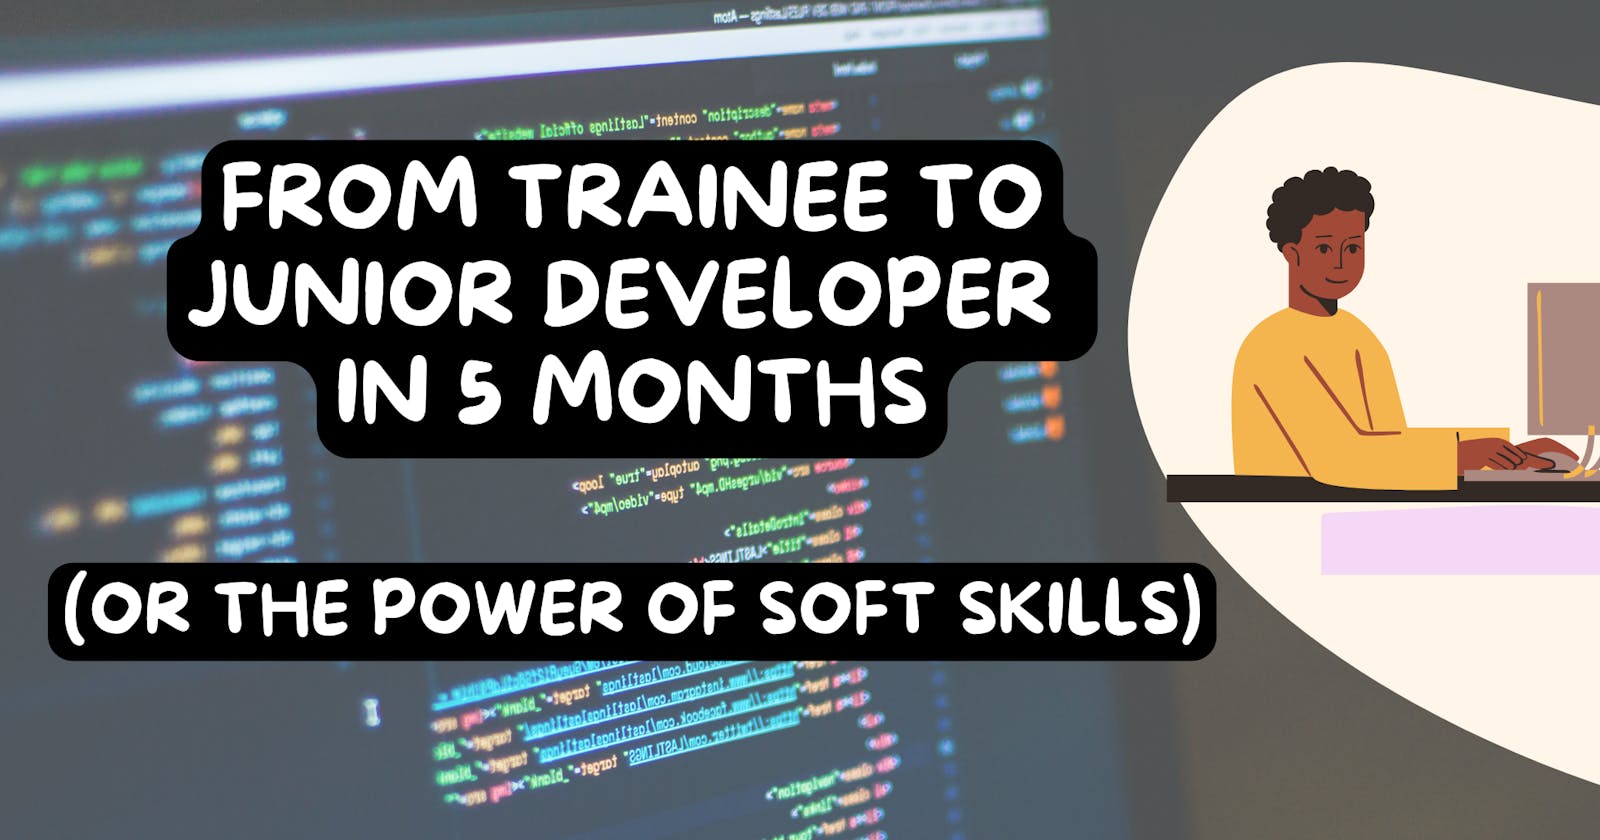 From Trainee to Junior developer in 5 months (or the power of soft skills)